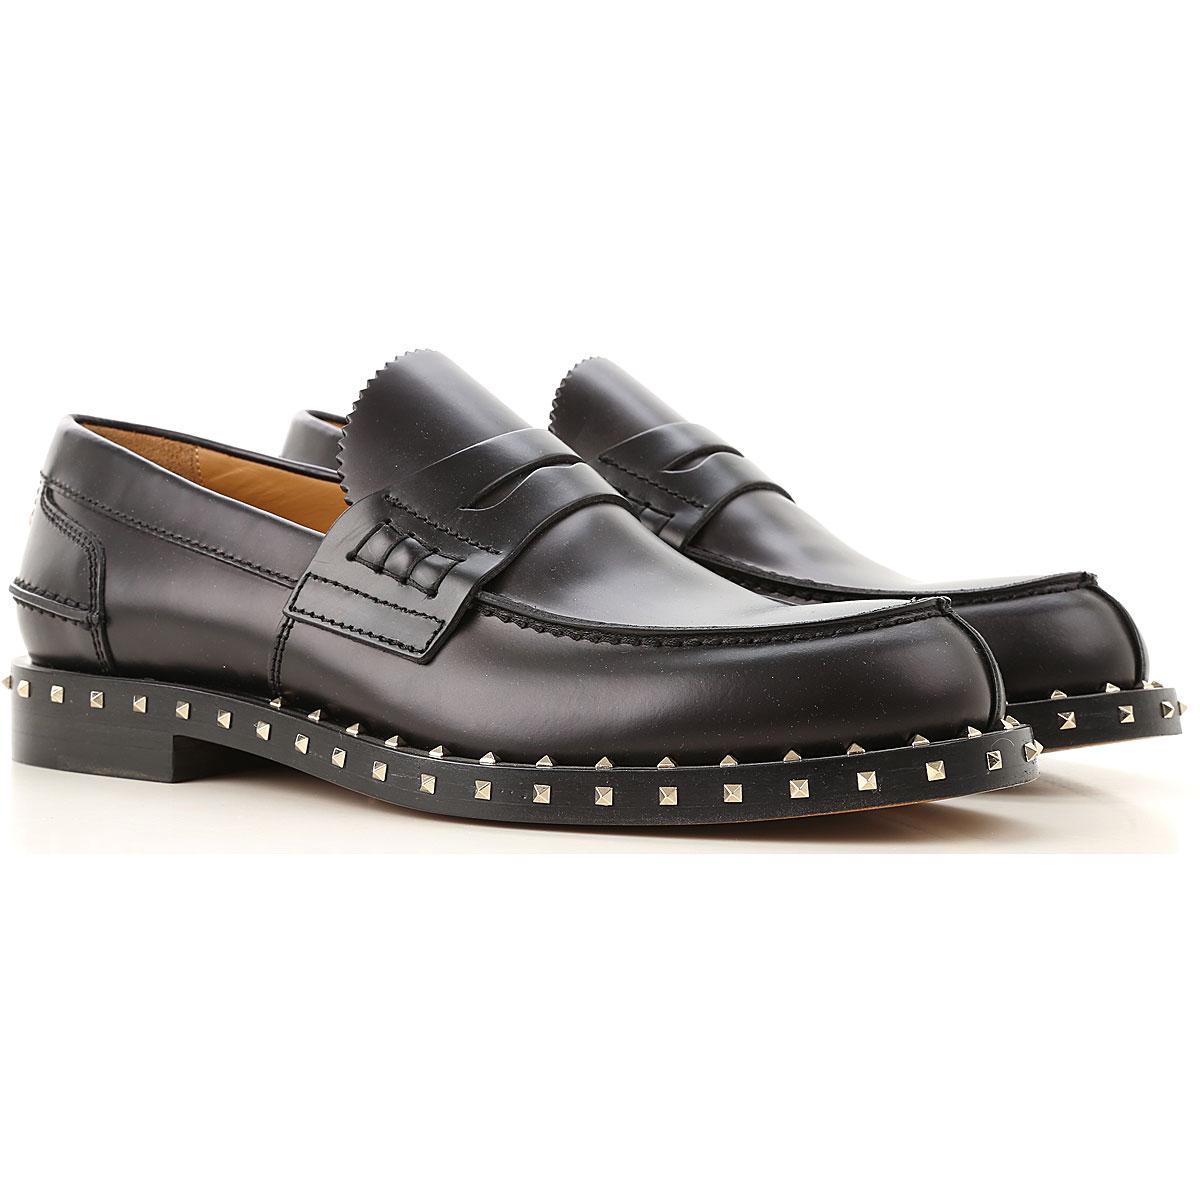 Valentino Leather Loafers For Men On Sale in Black for Men - Save 46% - Lyst